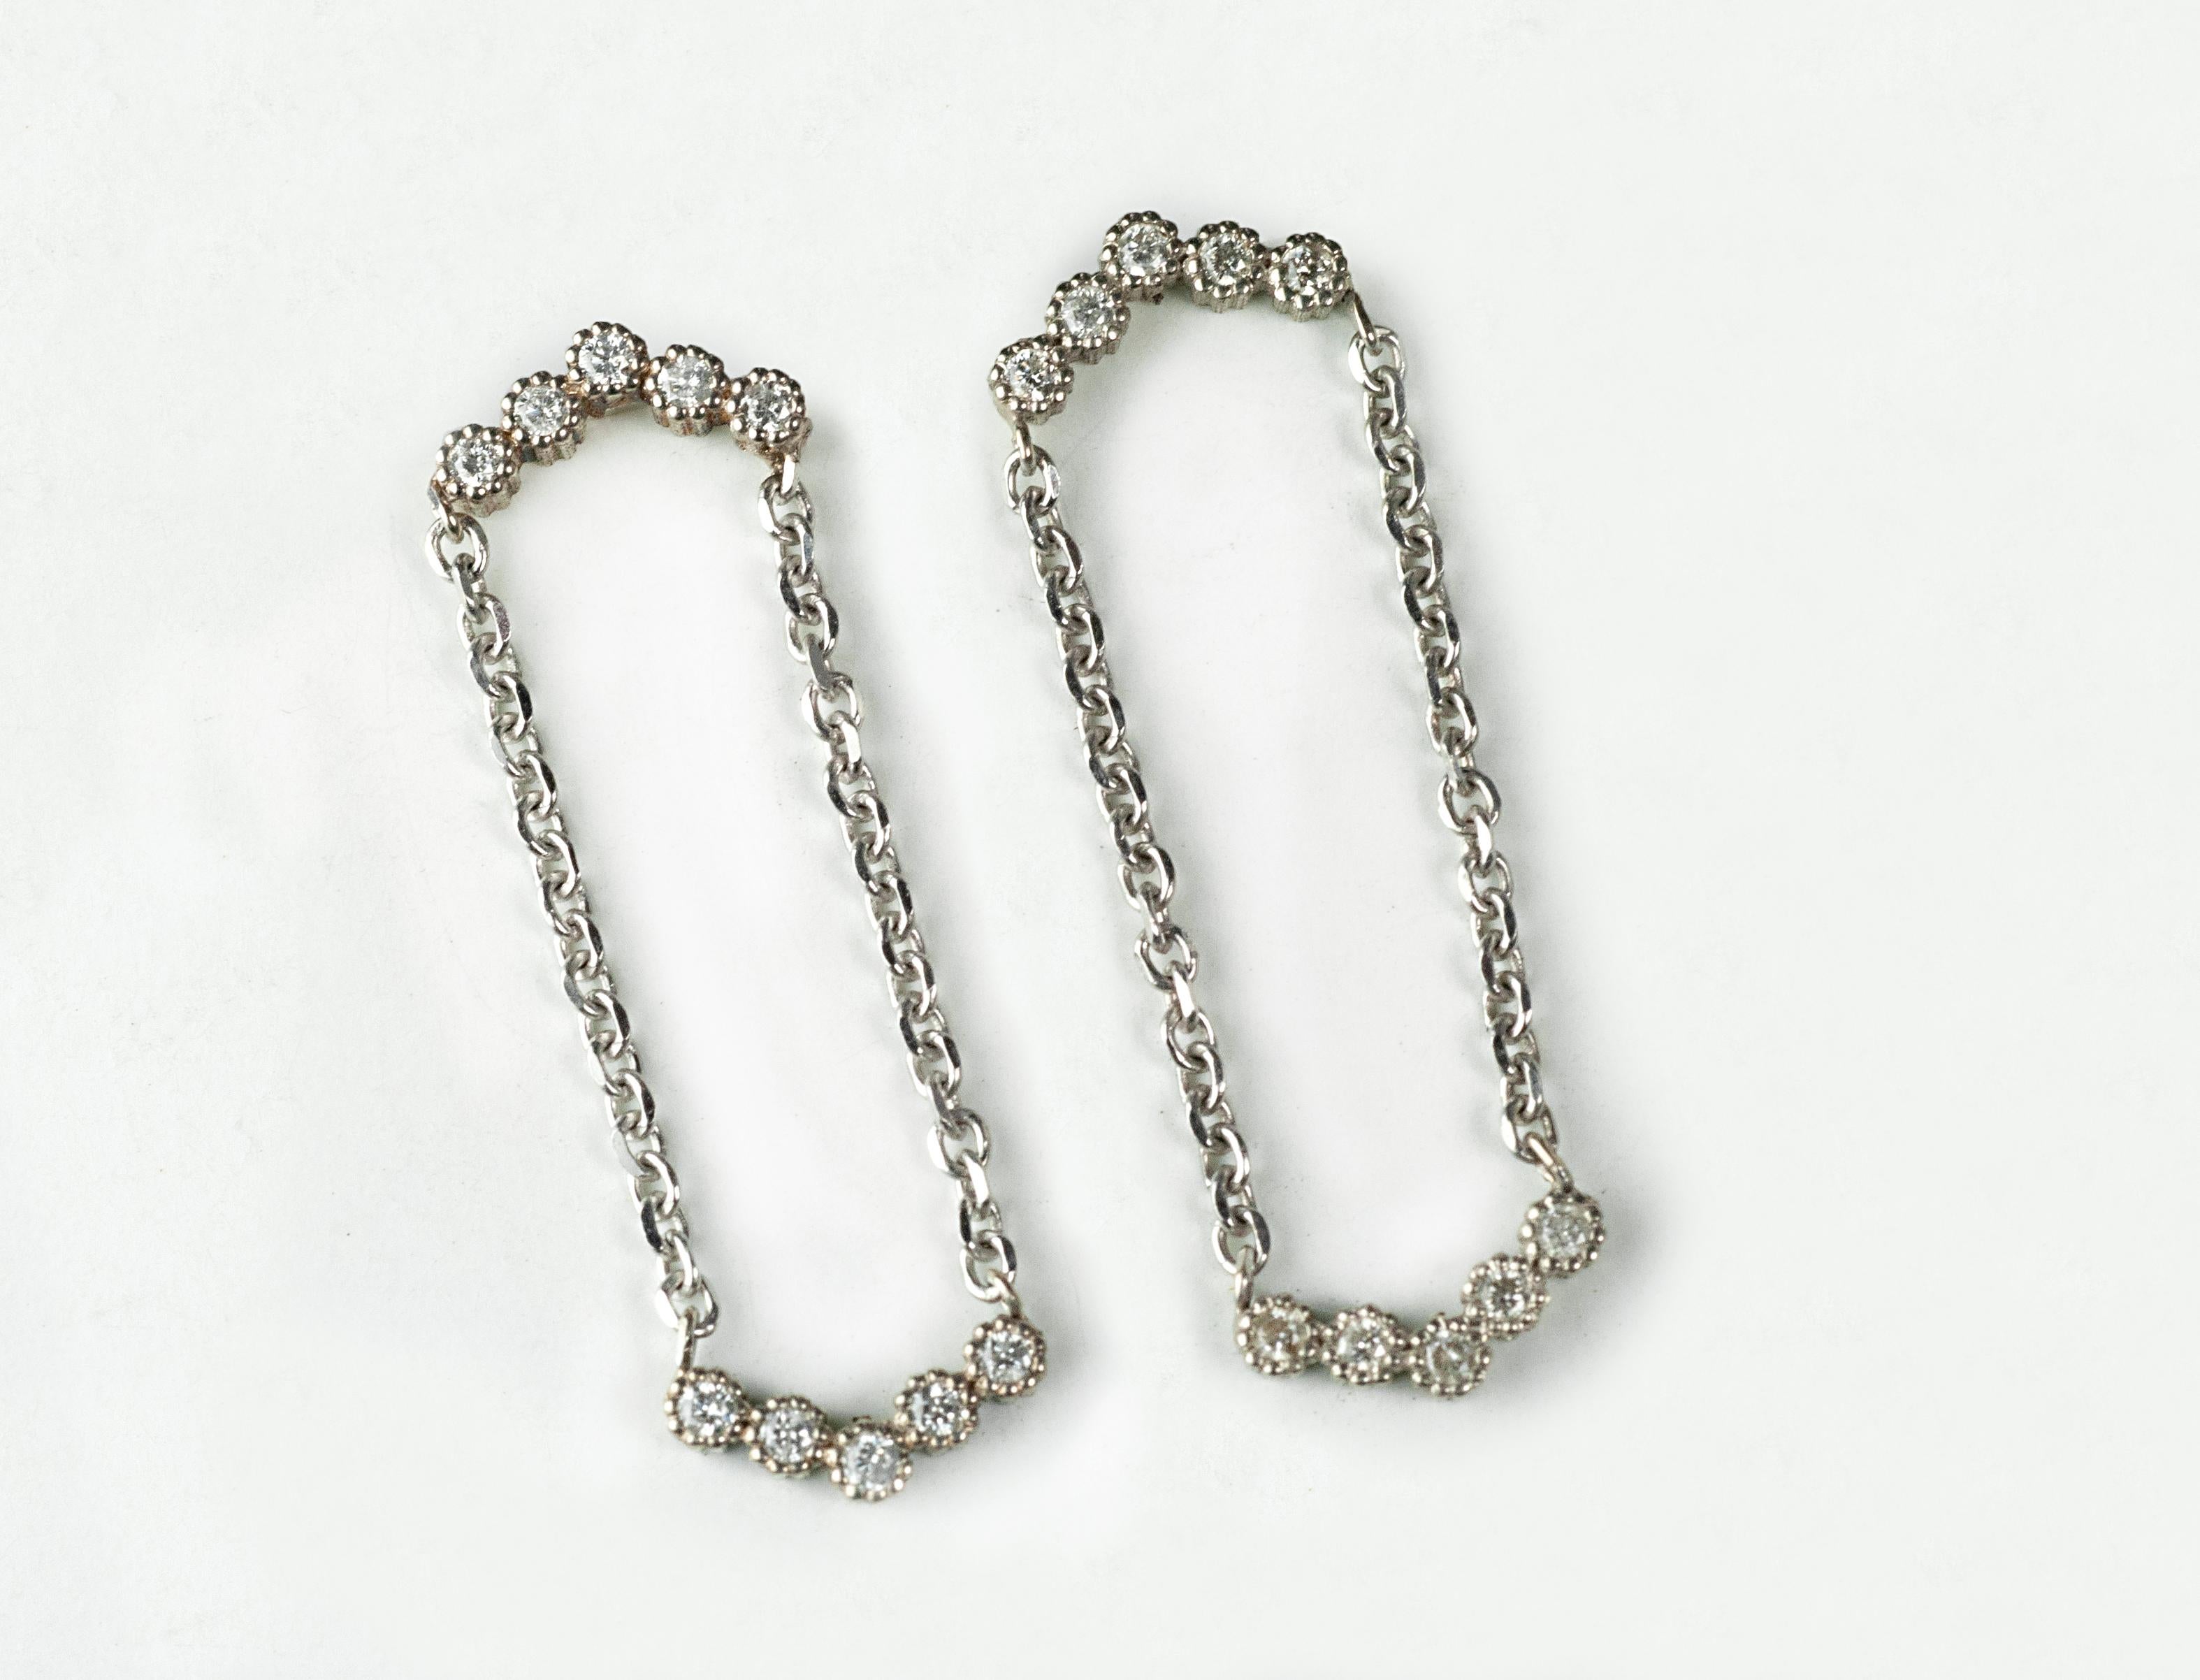 Chevron five diamond 0.20cts earring in 14K white gold with double inverted design. These earrings are dynamic and modern while having a classic vintage feel.